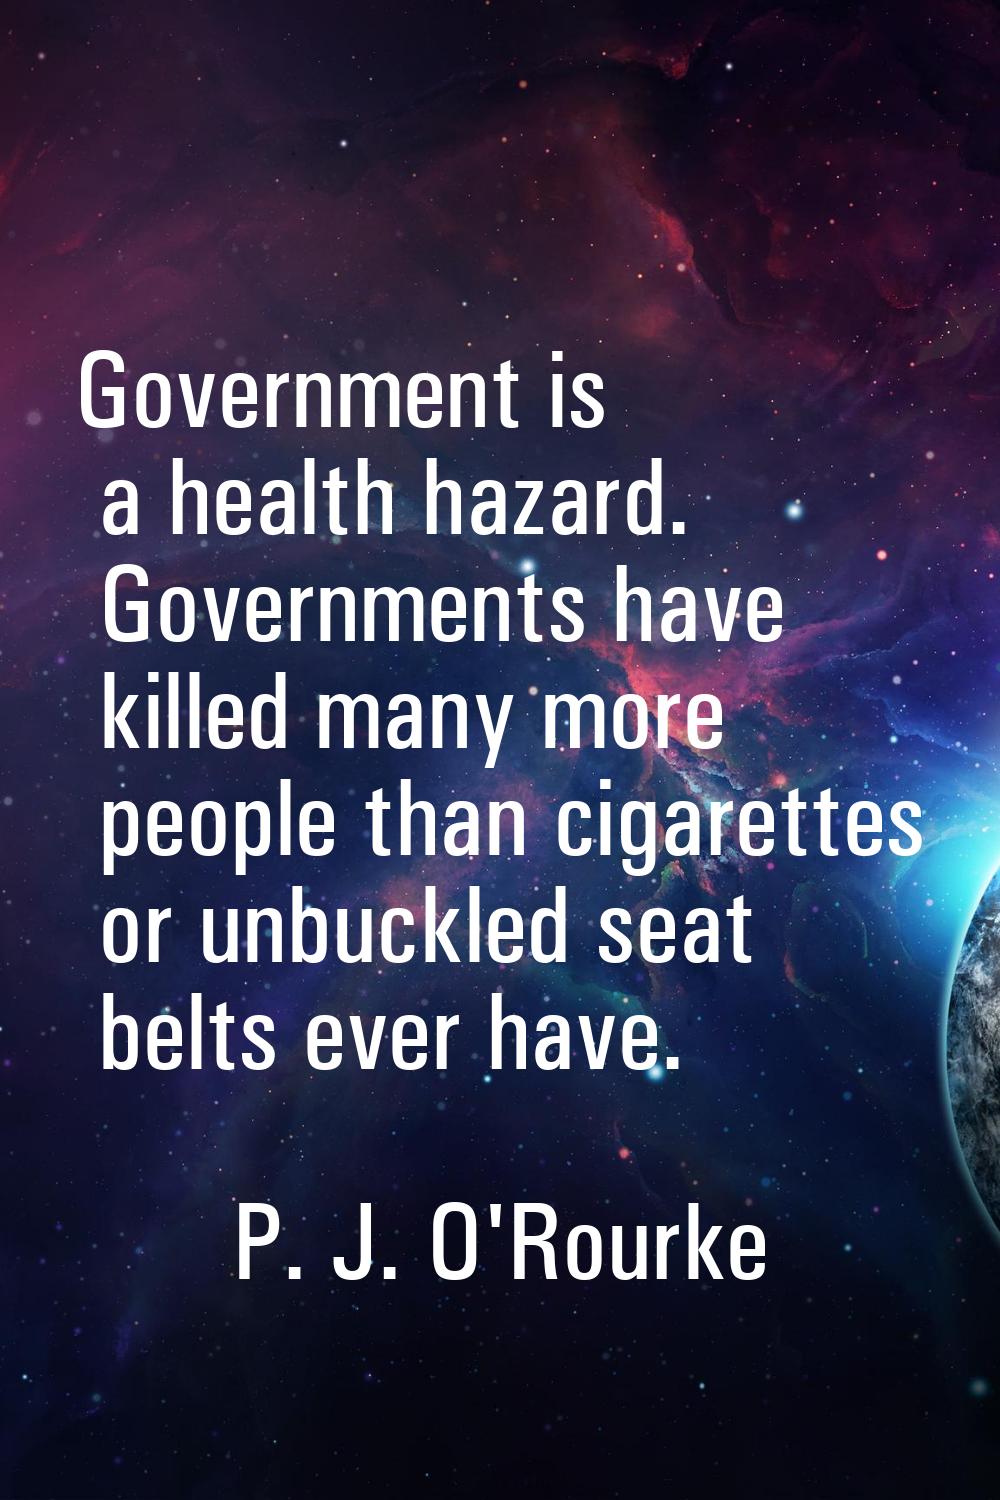 Government is a health hazard. Governments have killed many more people than cigarettes or unbuckle